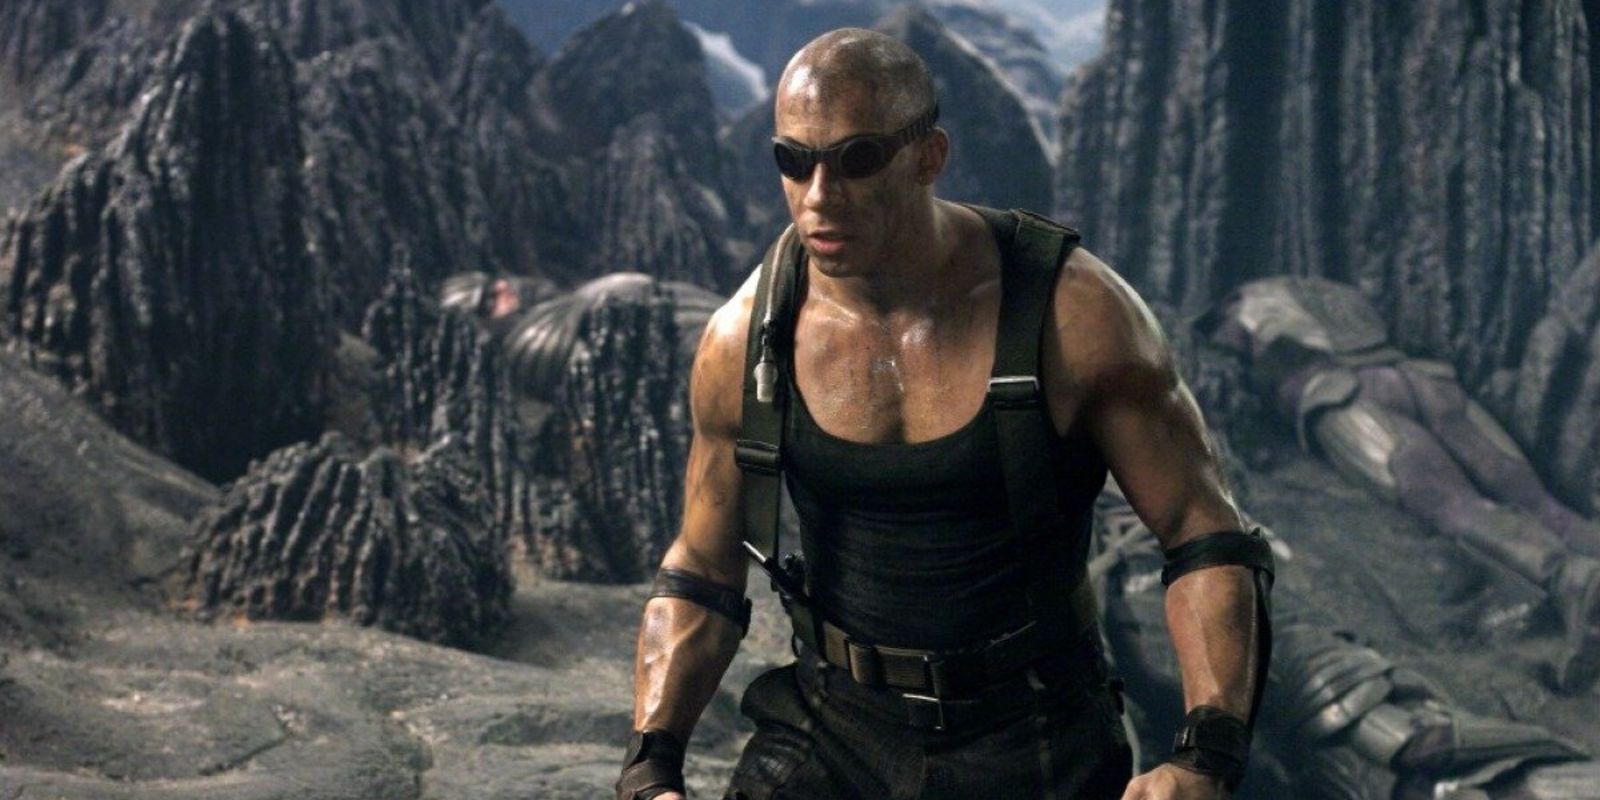 Riddick on the surface of Crematoria in The Chronicles Of Riddick